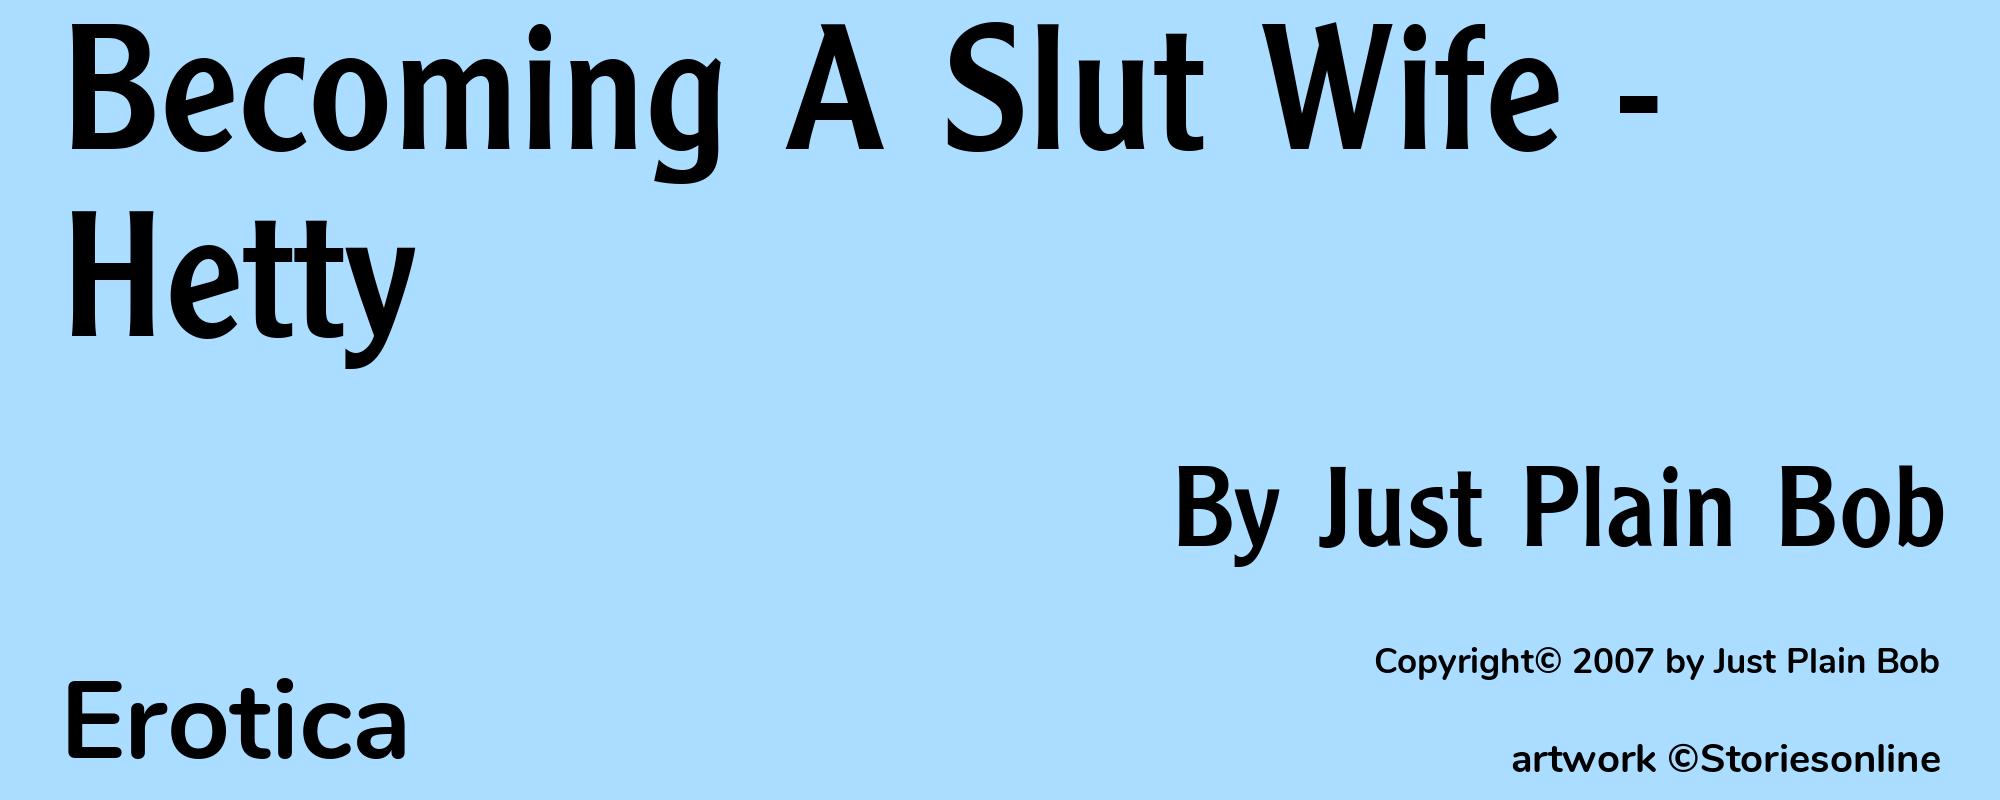 Becoming A Slut Wife - Hetty - Cover